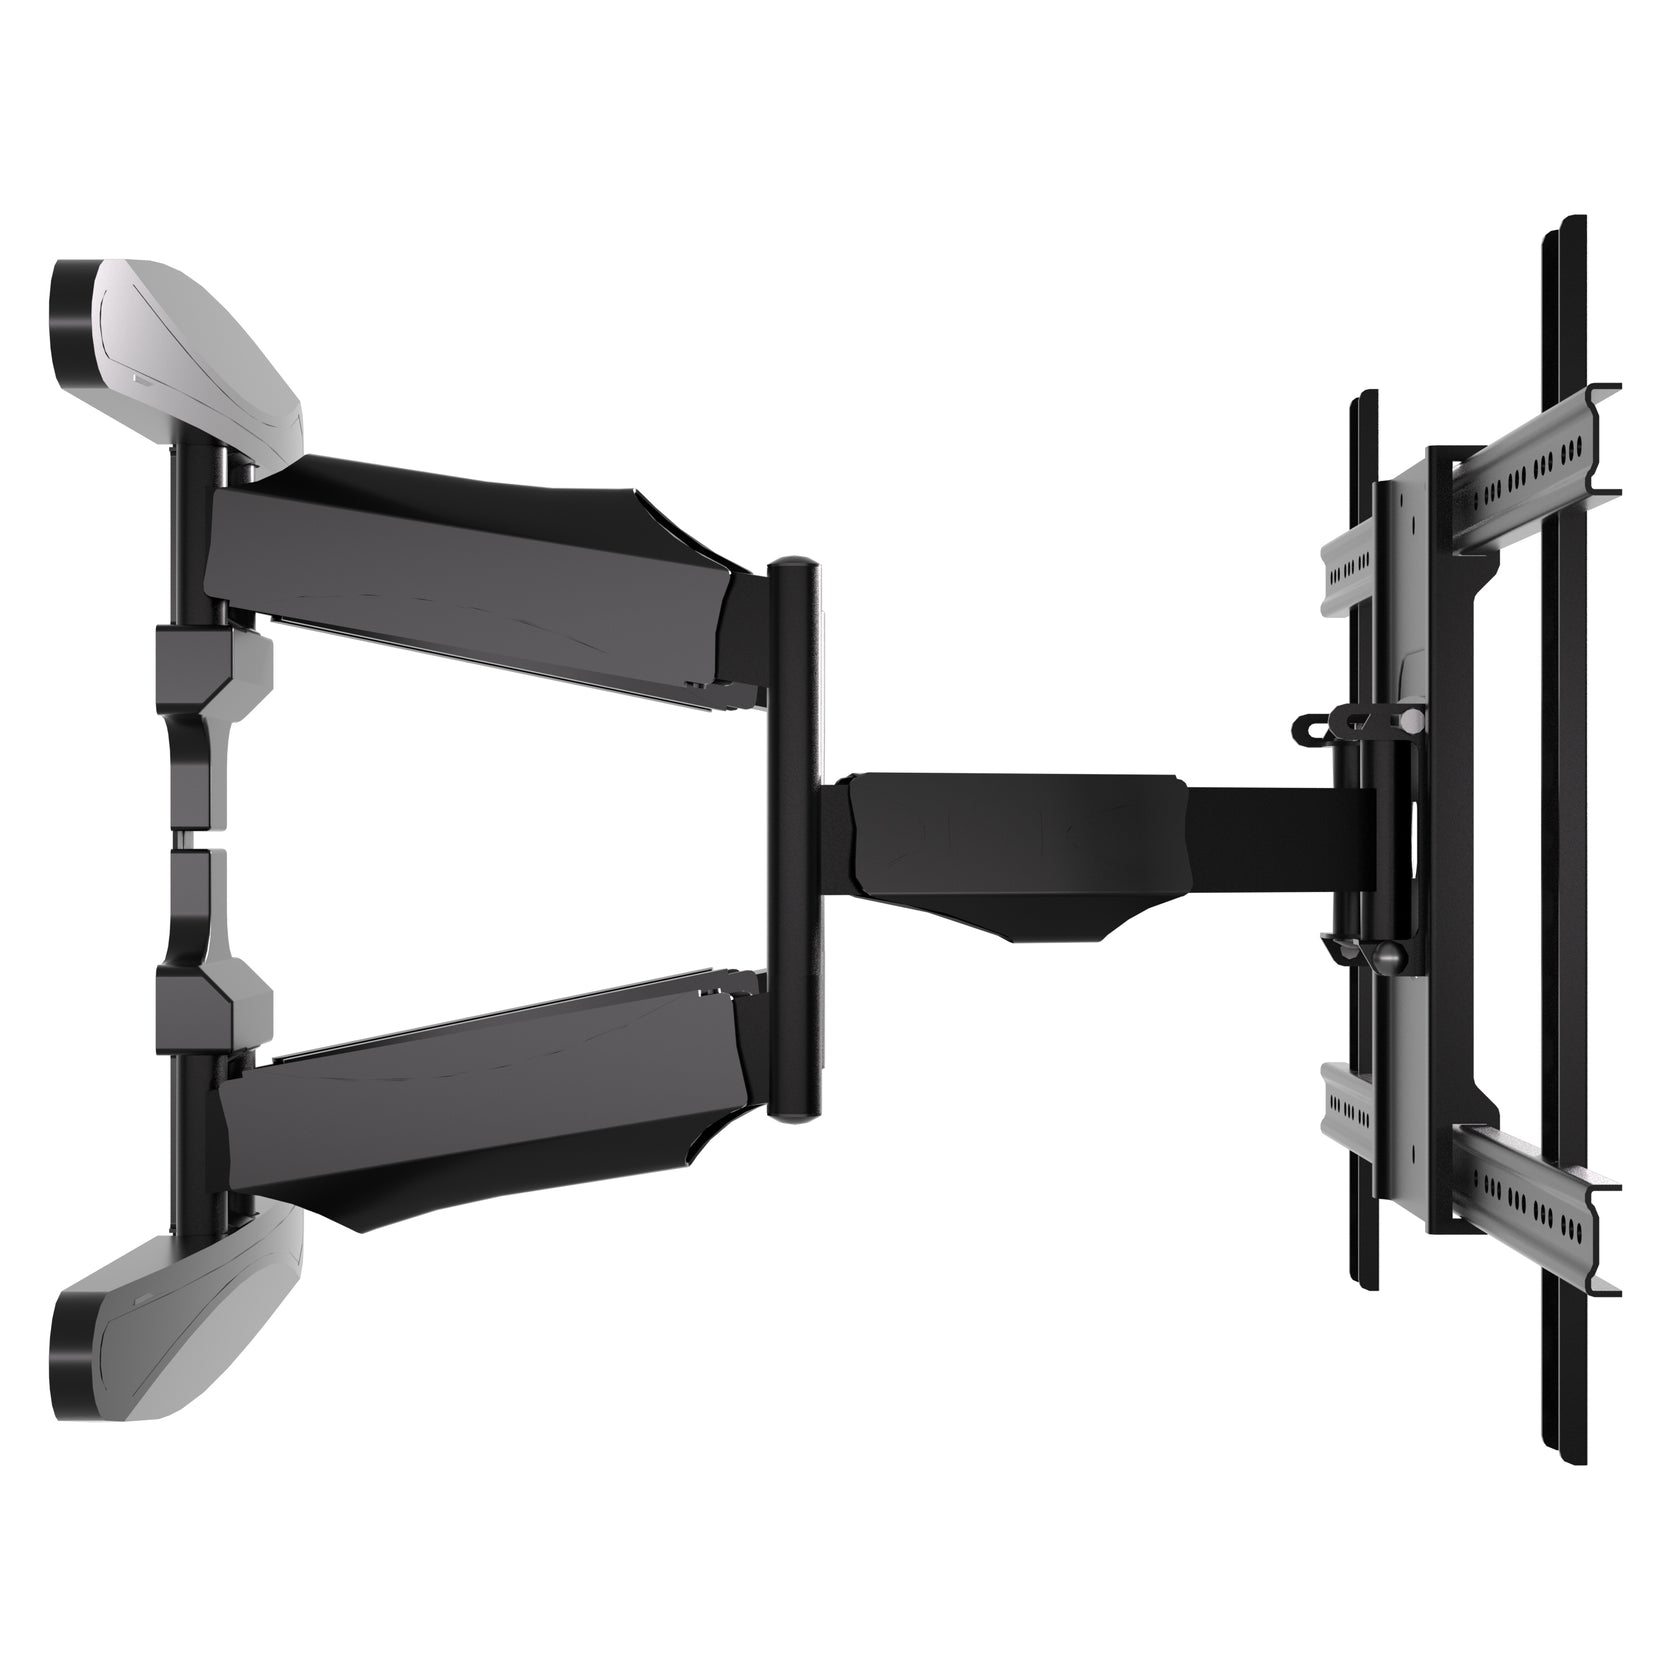 Promounts MA641 42-Inch to 85 Inch Extra-Large Articulating TV Wall Mount